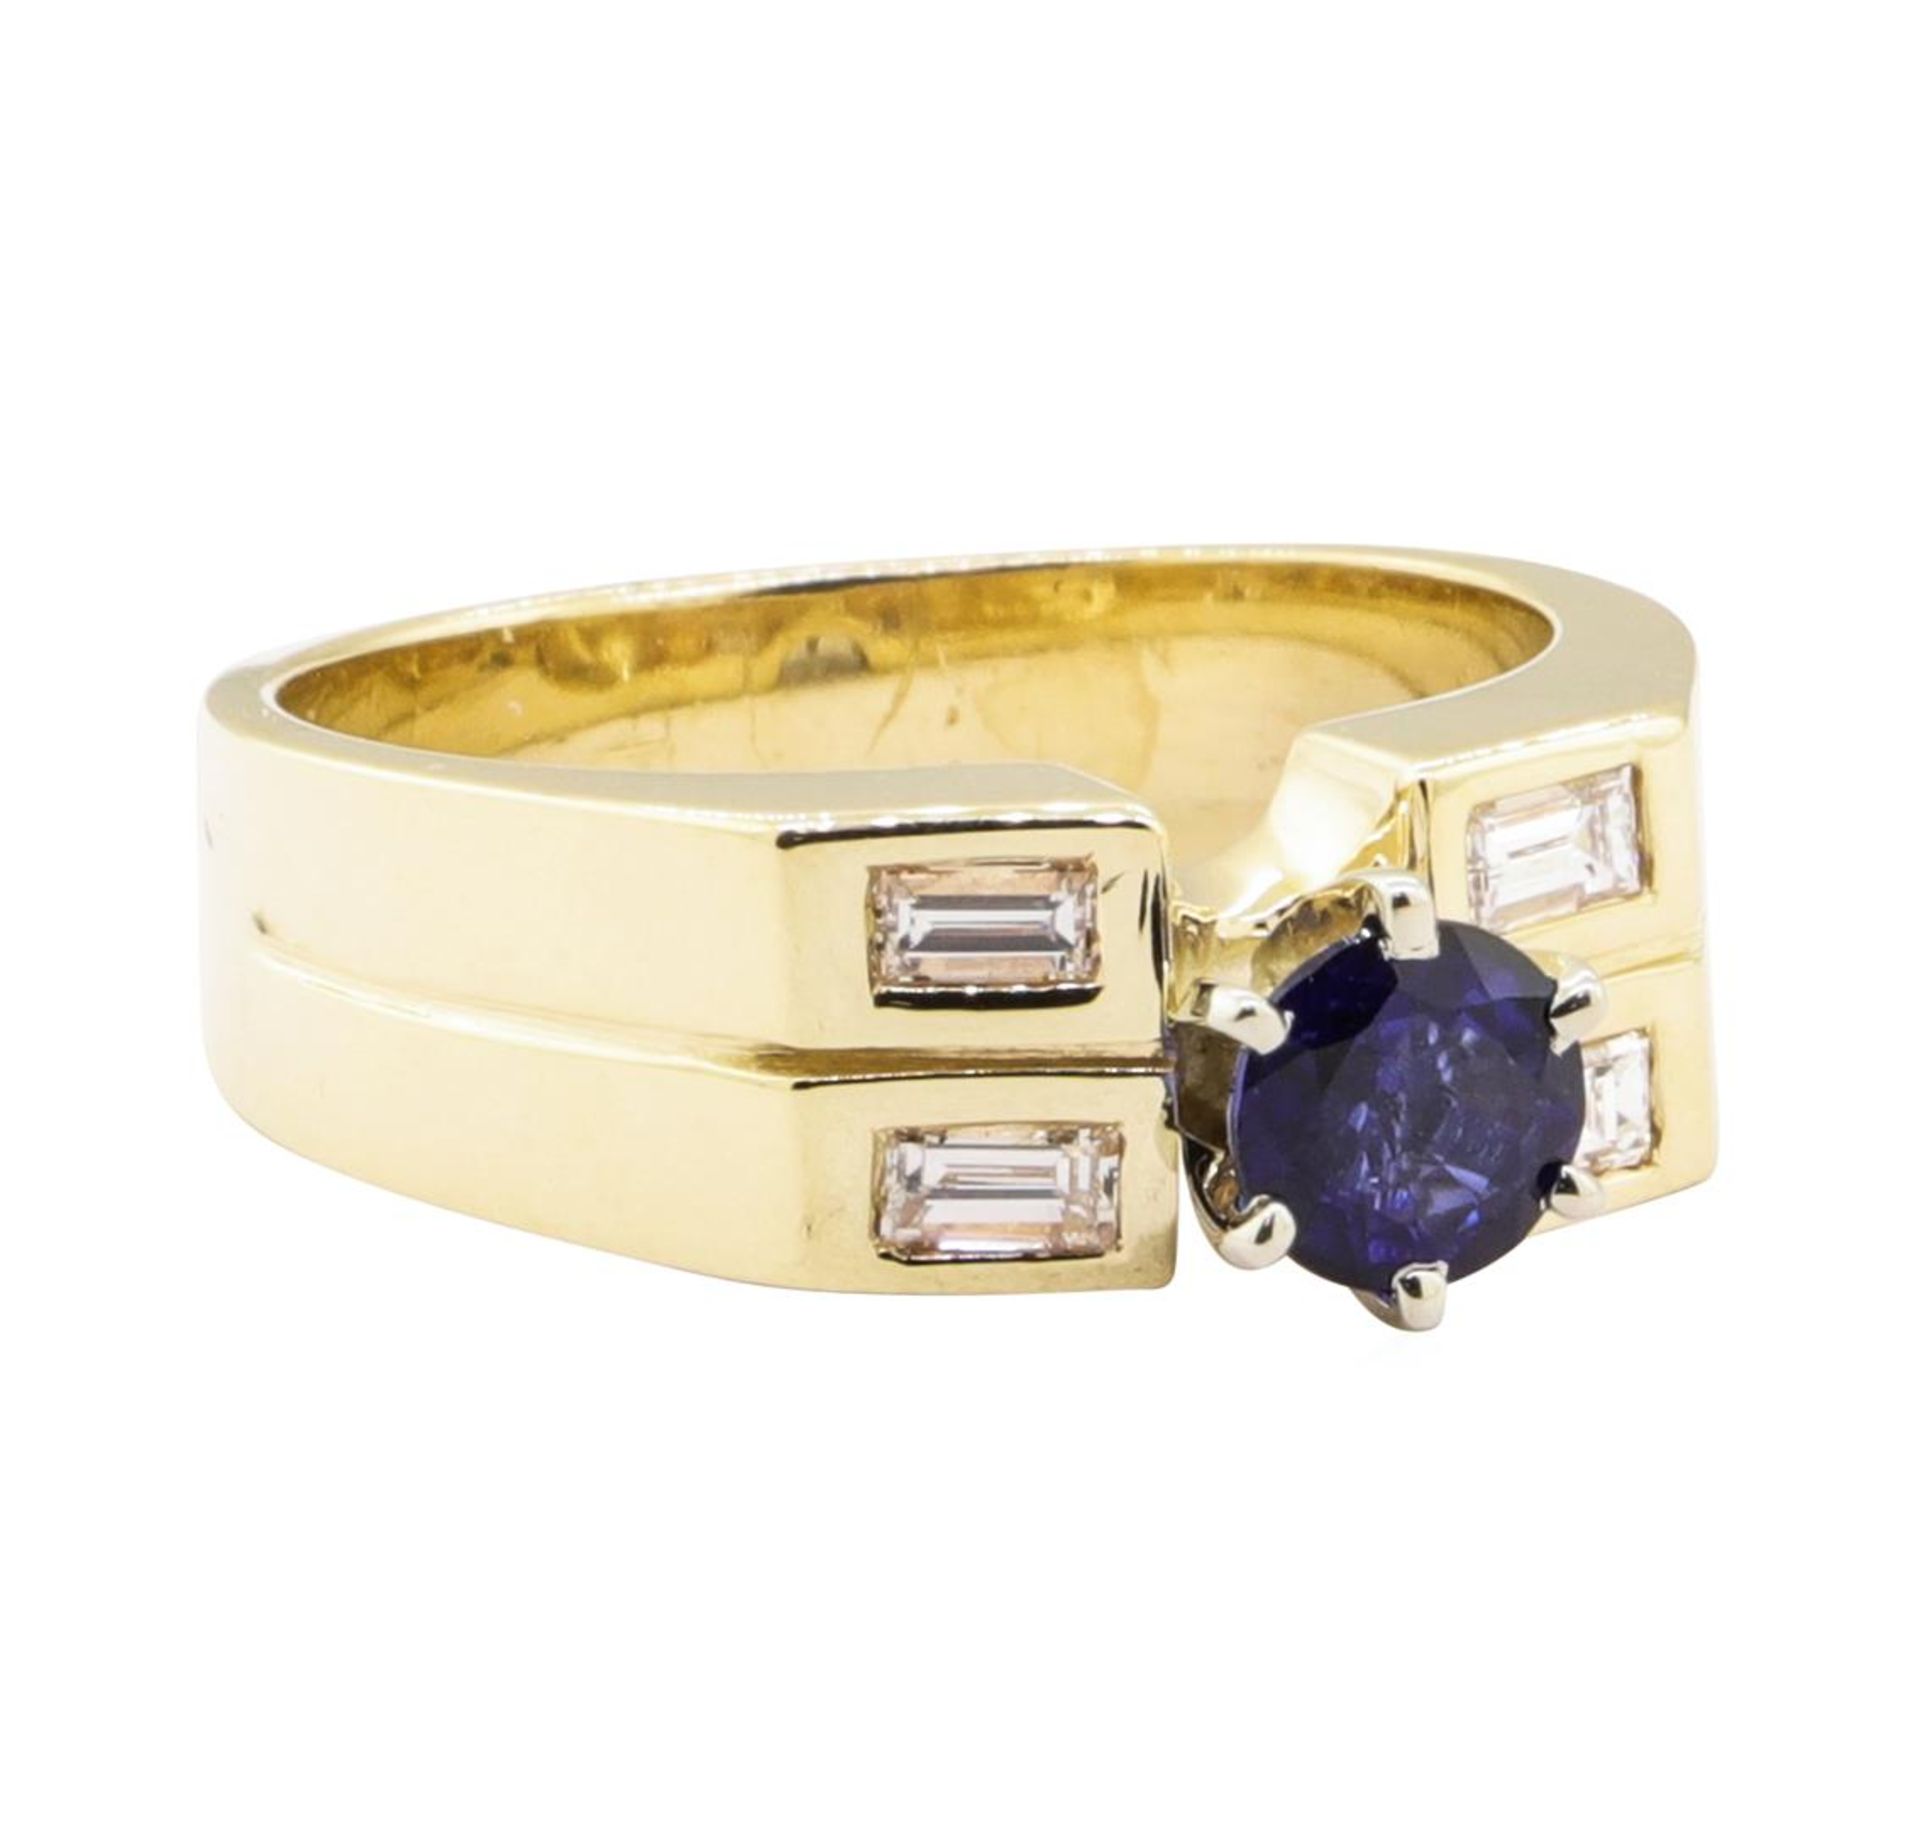 1.02ctw Blue Sapphire and Diamond Ring - 14KT Yellow Gold